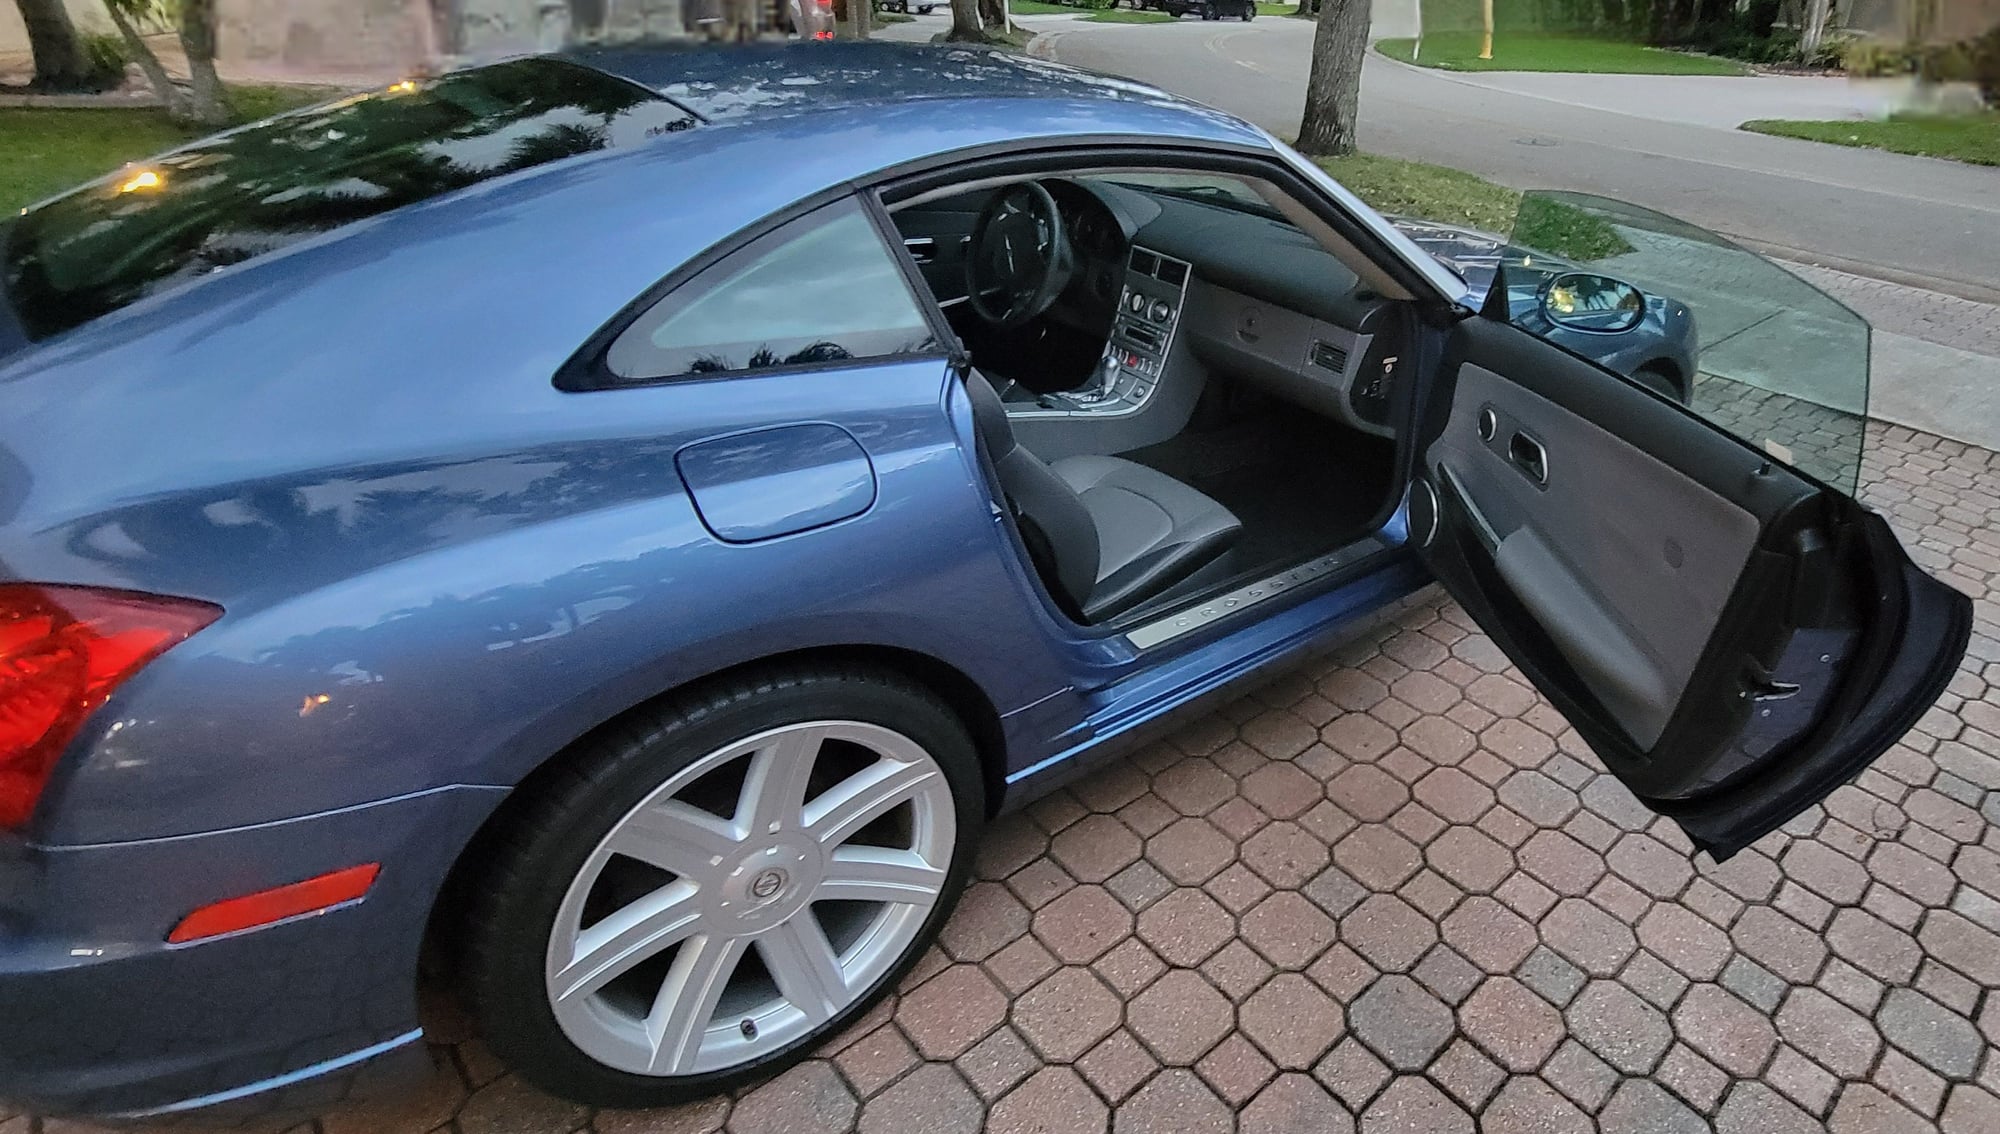 2005 Chrysler Crossfire - 2005 Crossfire LTD - Used - VIN 1C3AN69L55X040521 - 6 cyl - 2WD - Automatic - Coupe - Blue - Coconut Creek, FL 33073, United States